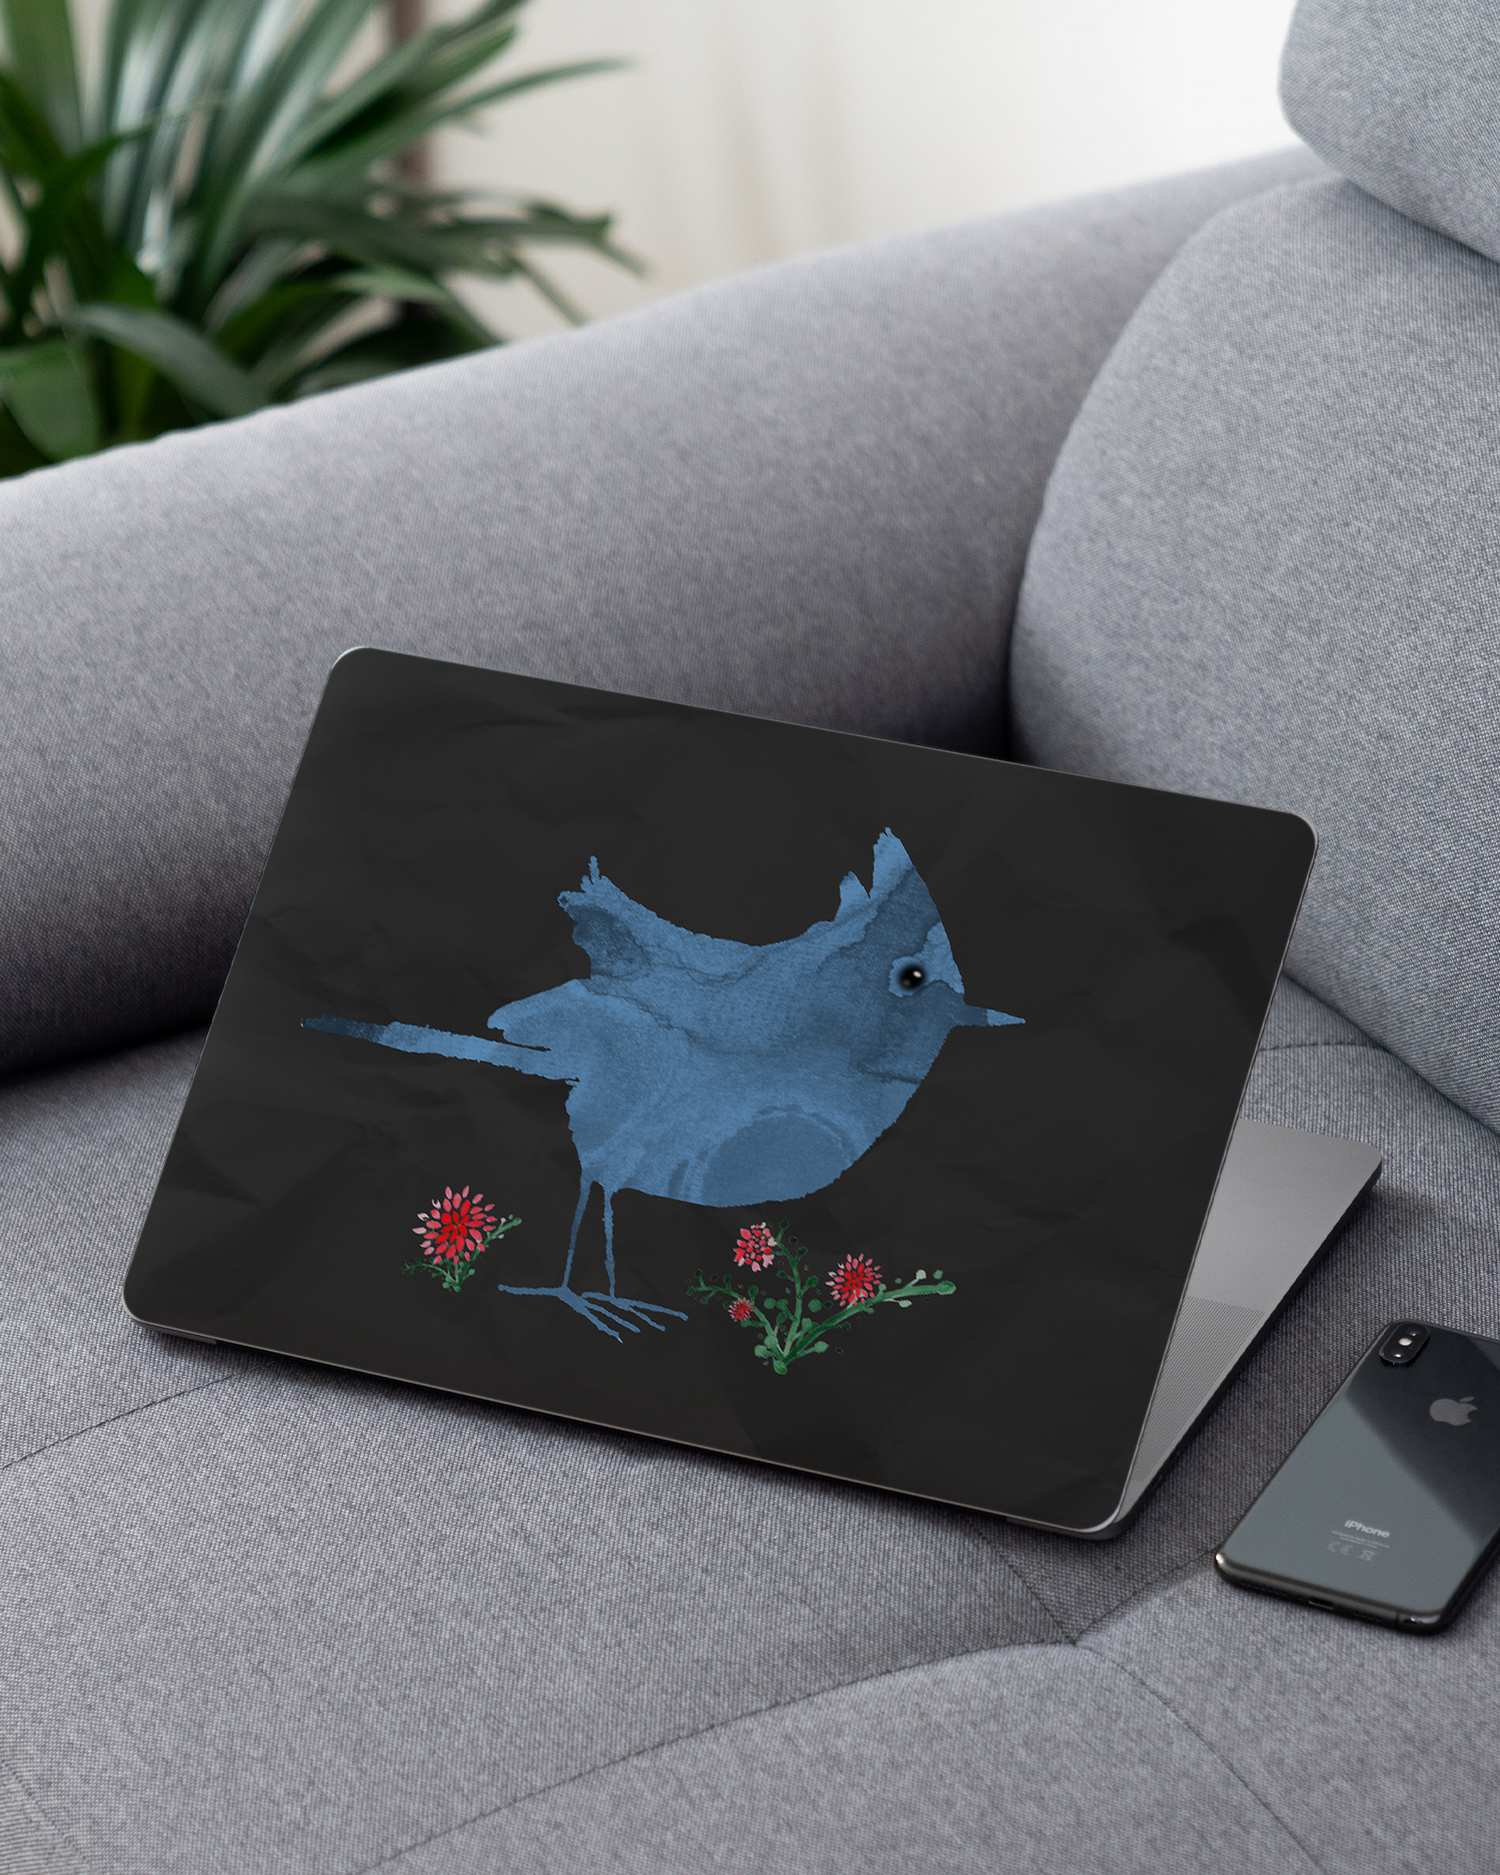 Watercolour Bird Black Laptop Skin for 13 inch Apple MacBooks on a couch